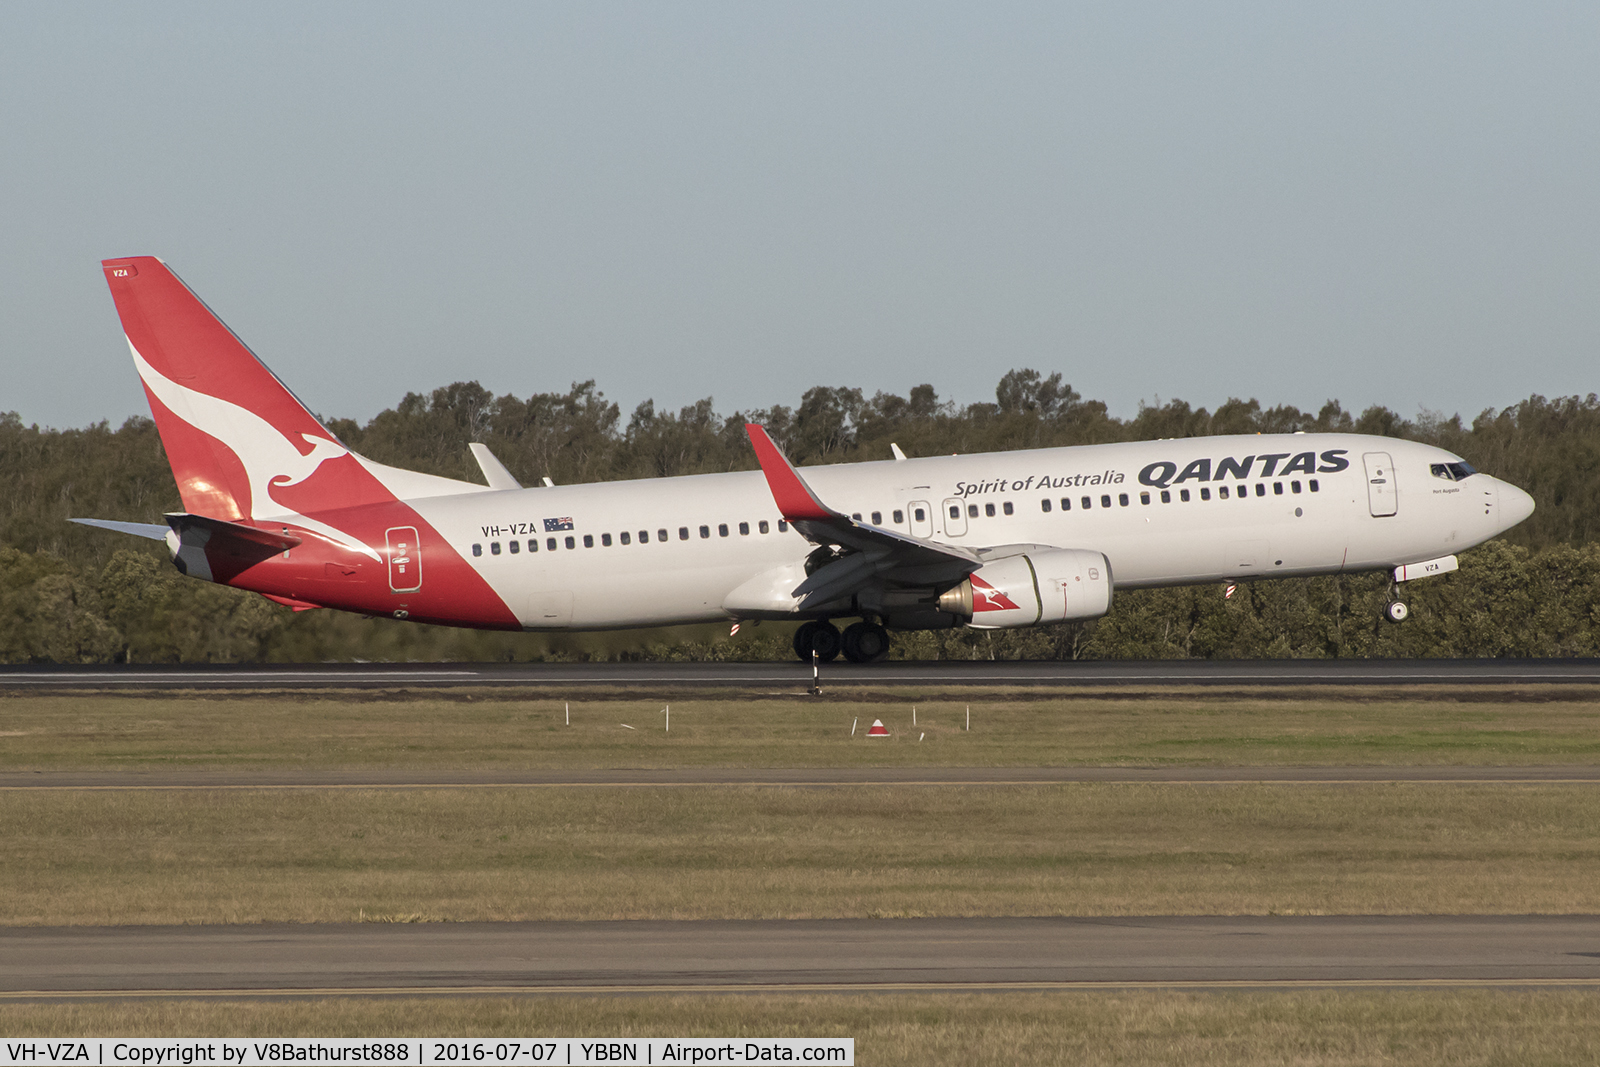 VH-VZA, 2008 Boeing 737-838 C/N 34195, Port Augusta activating the reversers